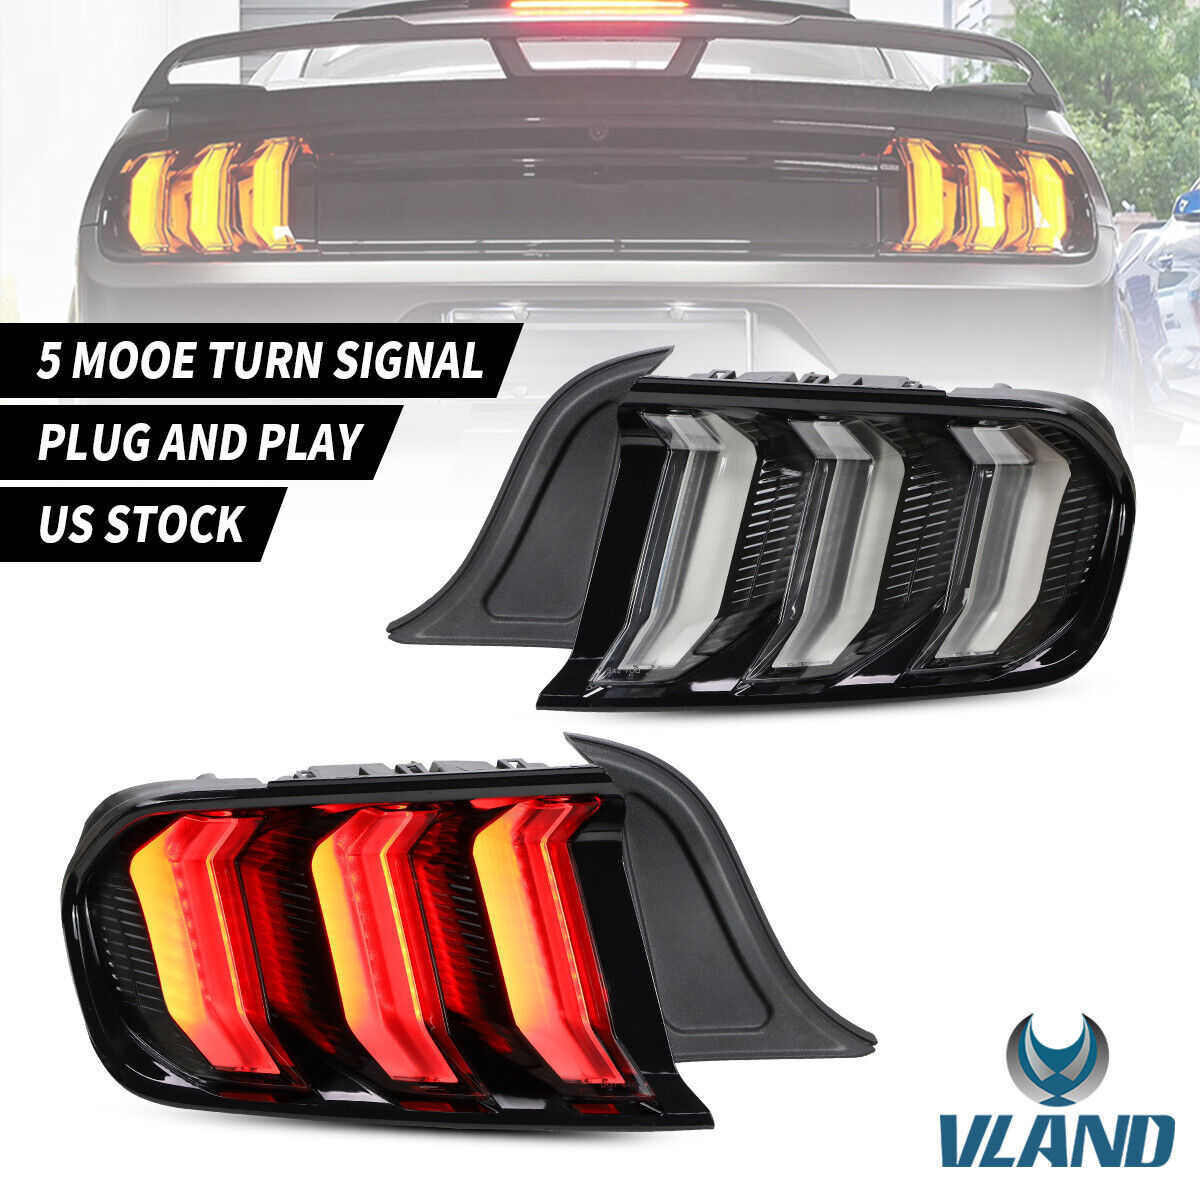 VLAND 2X Full LED Tail Lights for Ford Mustang 2015-2020 2018 2019 US/Euro Model